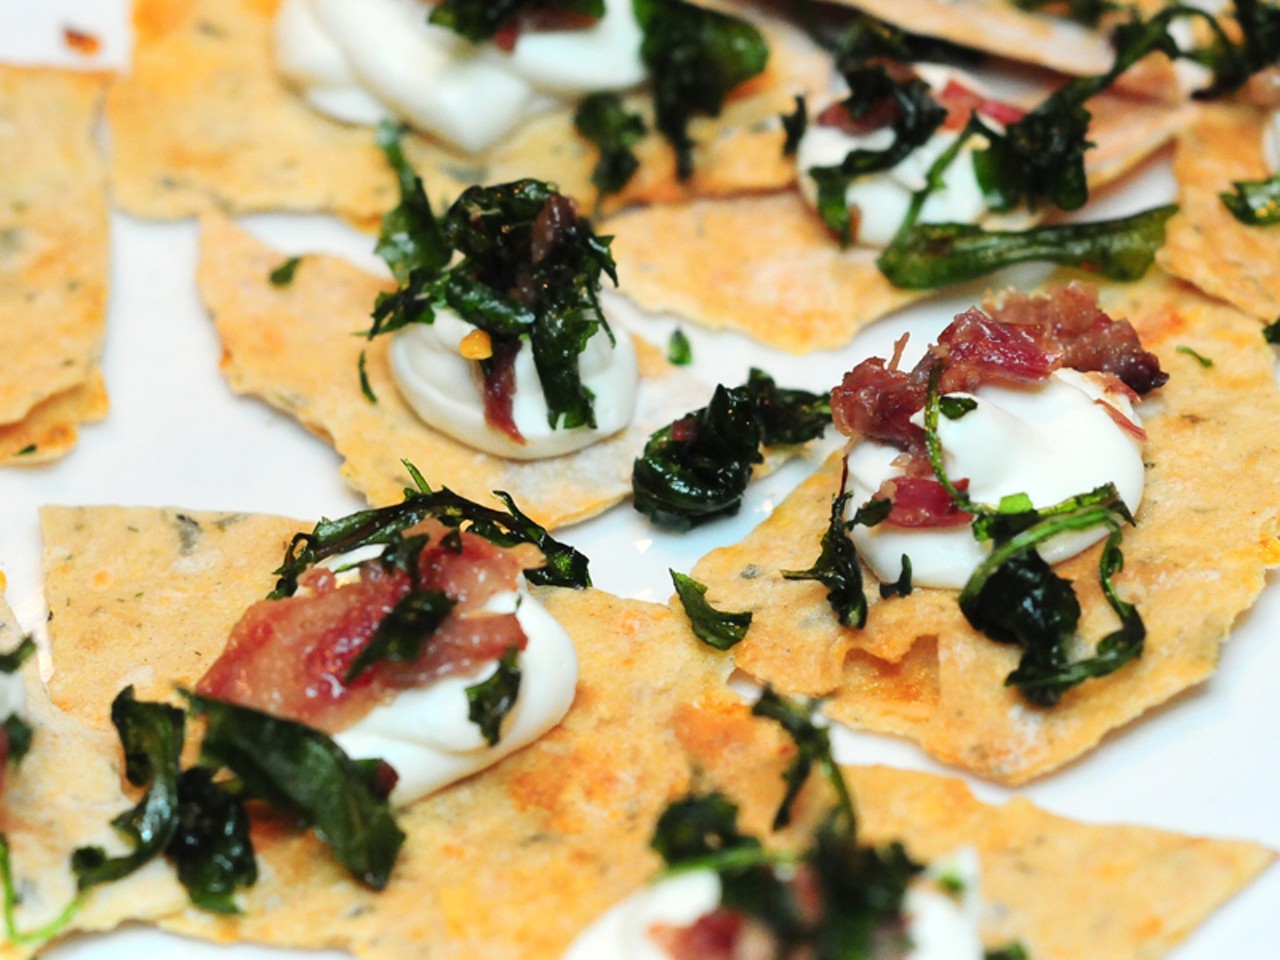 Hand-rolled cracker with goat cheese mousse, house-cured bacon and crispy arugula, seasoned with Sea Salt and crushed red pepper from the Scottish Arms on Sarh Street in Midtown.